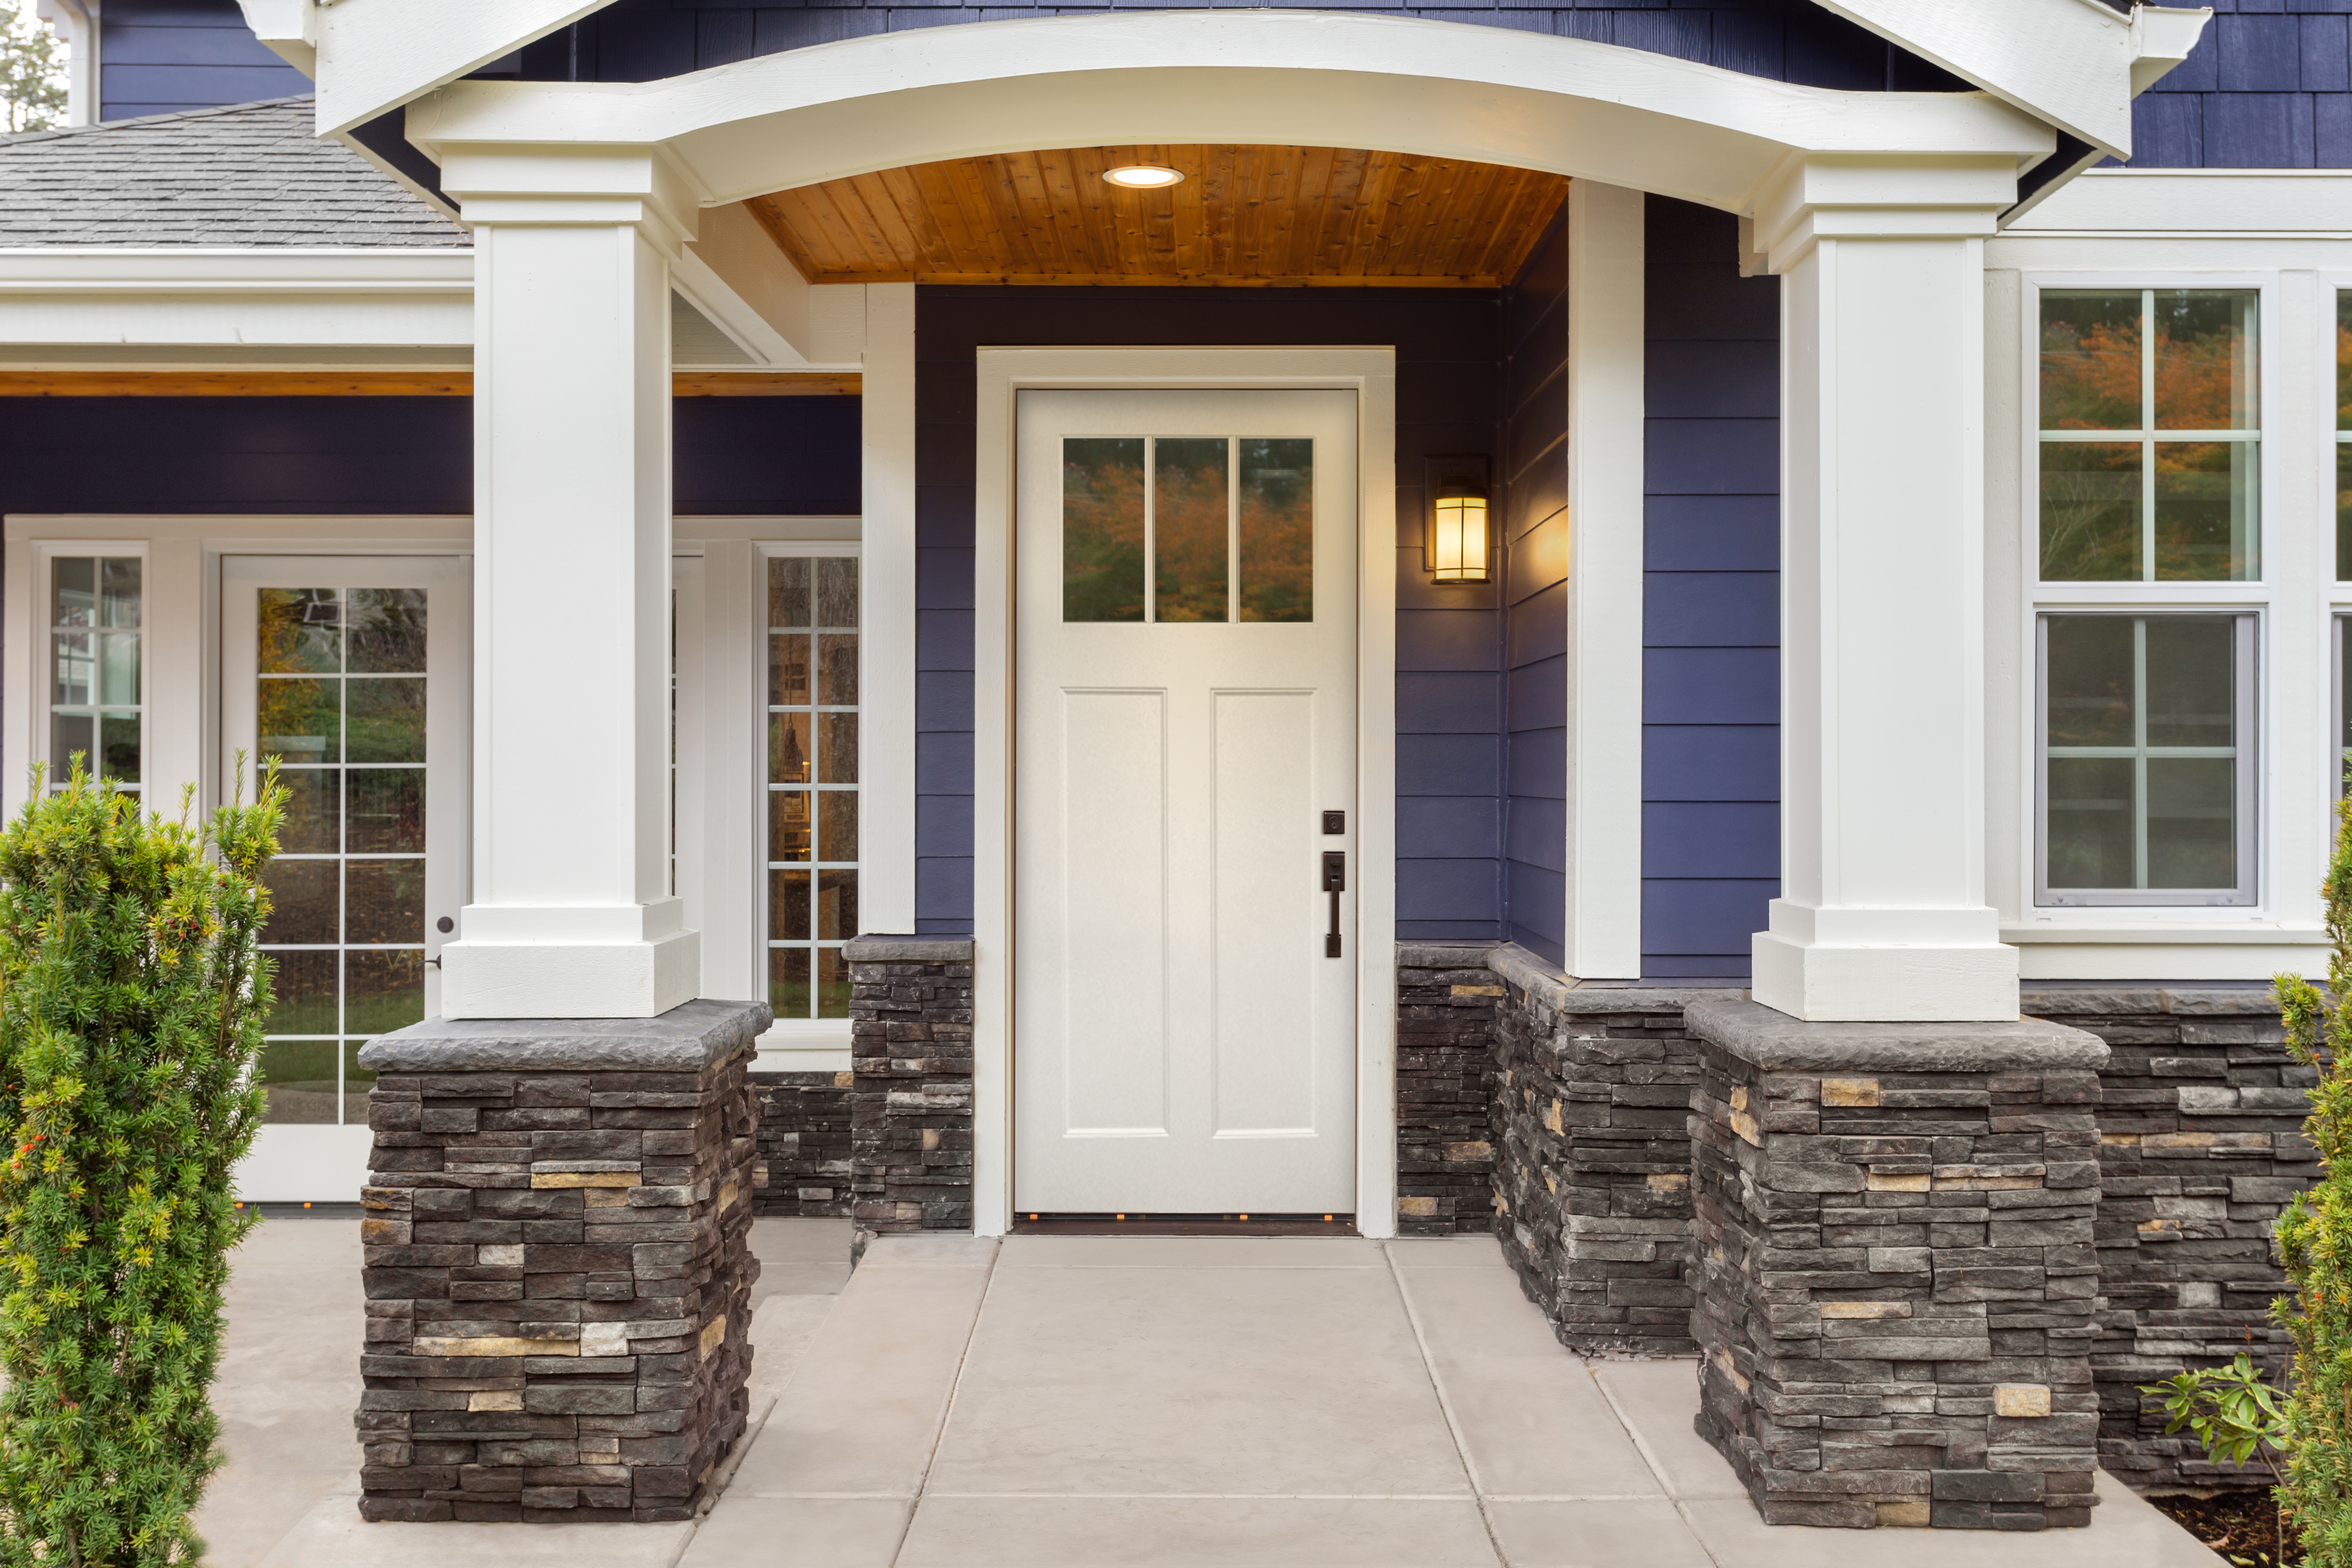 Close-up of white and blue home with a craftsman style entry door.